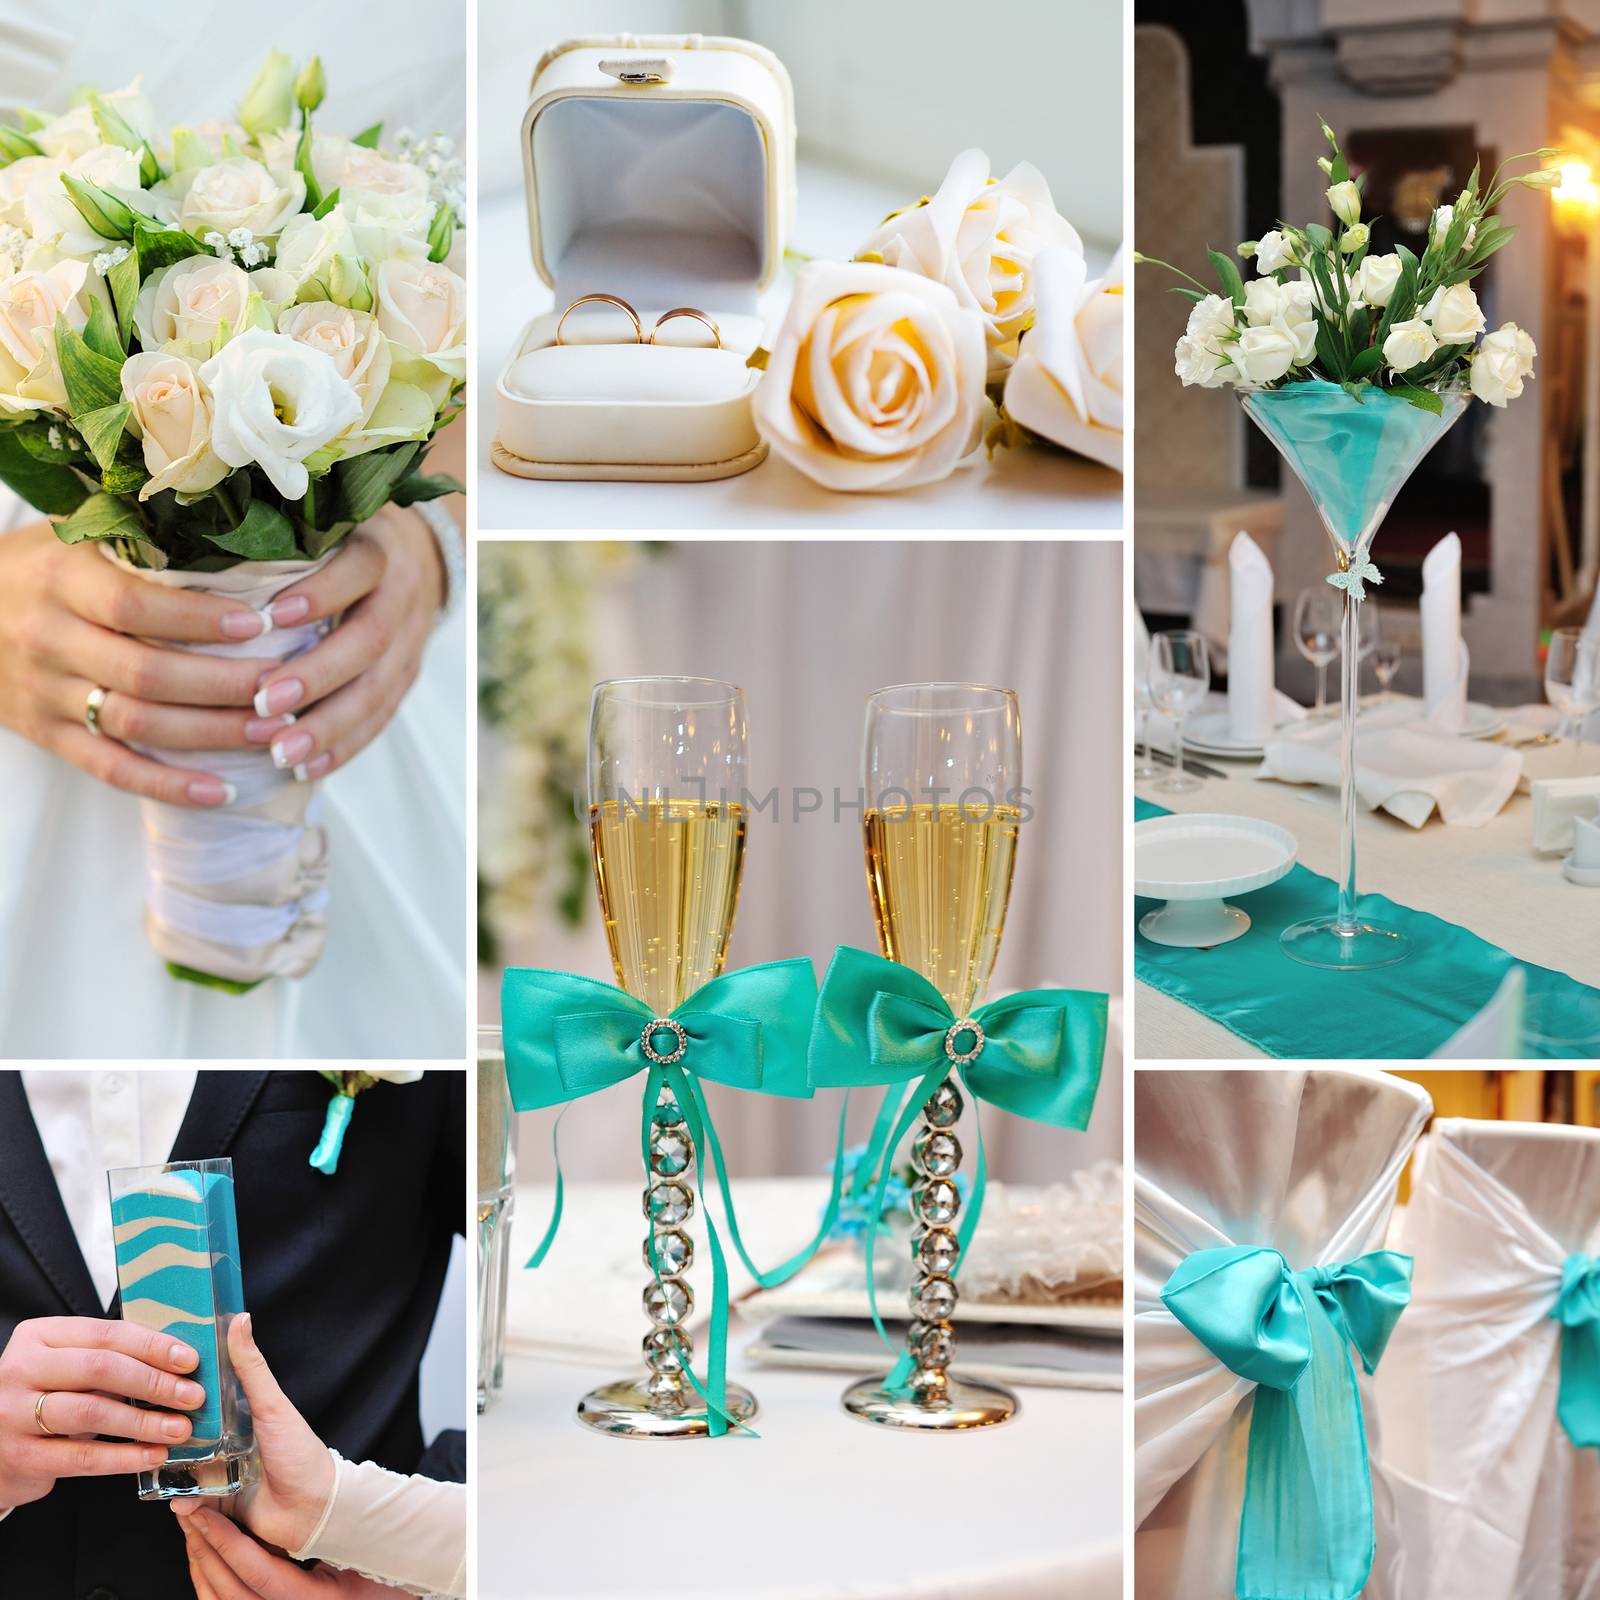 collage of wedding pictures decorations in turquoise, blue color by timonko